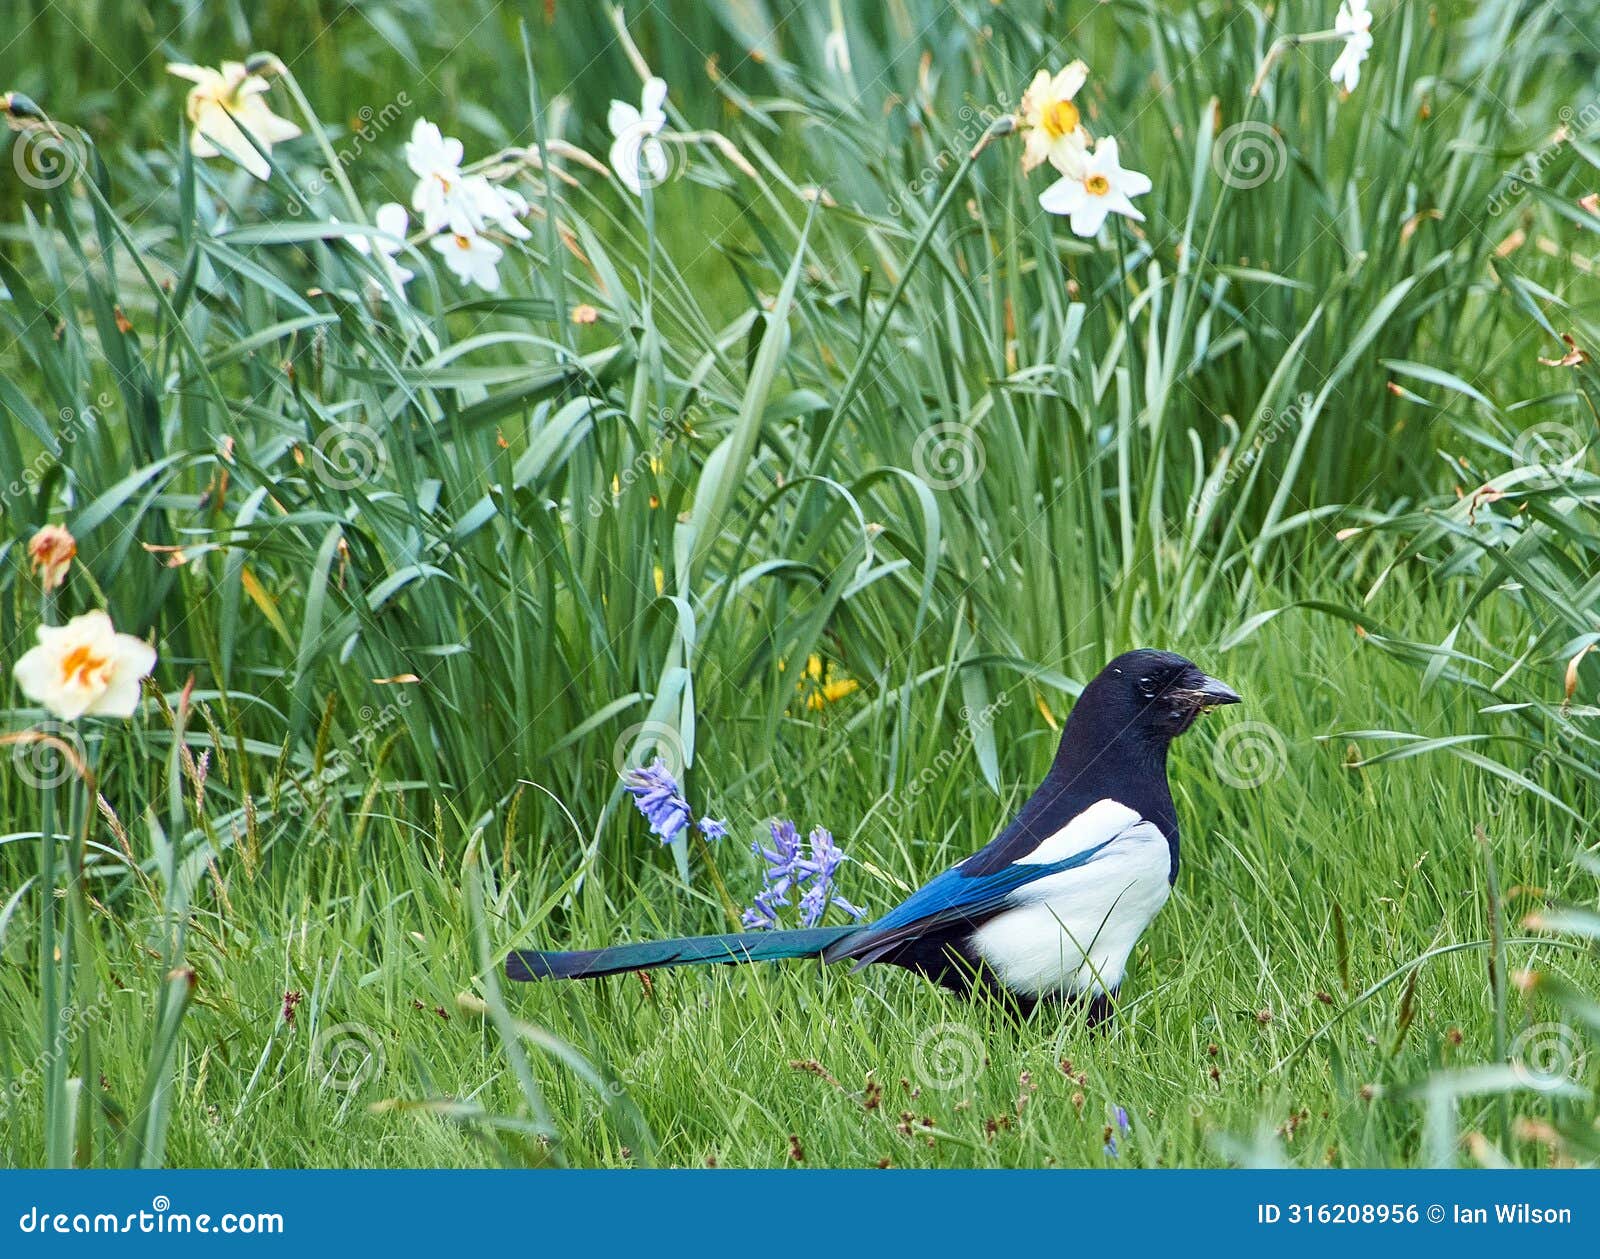 magpie in a field with daffodils - blue plumage